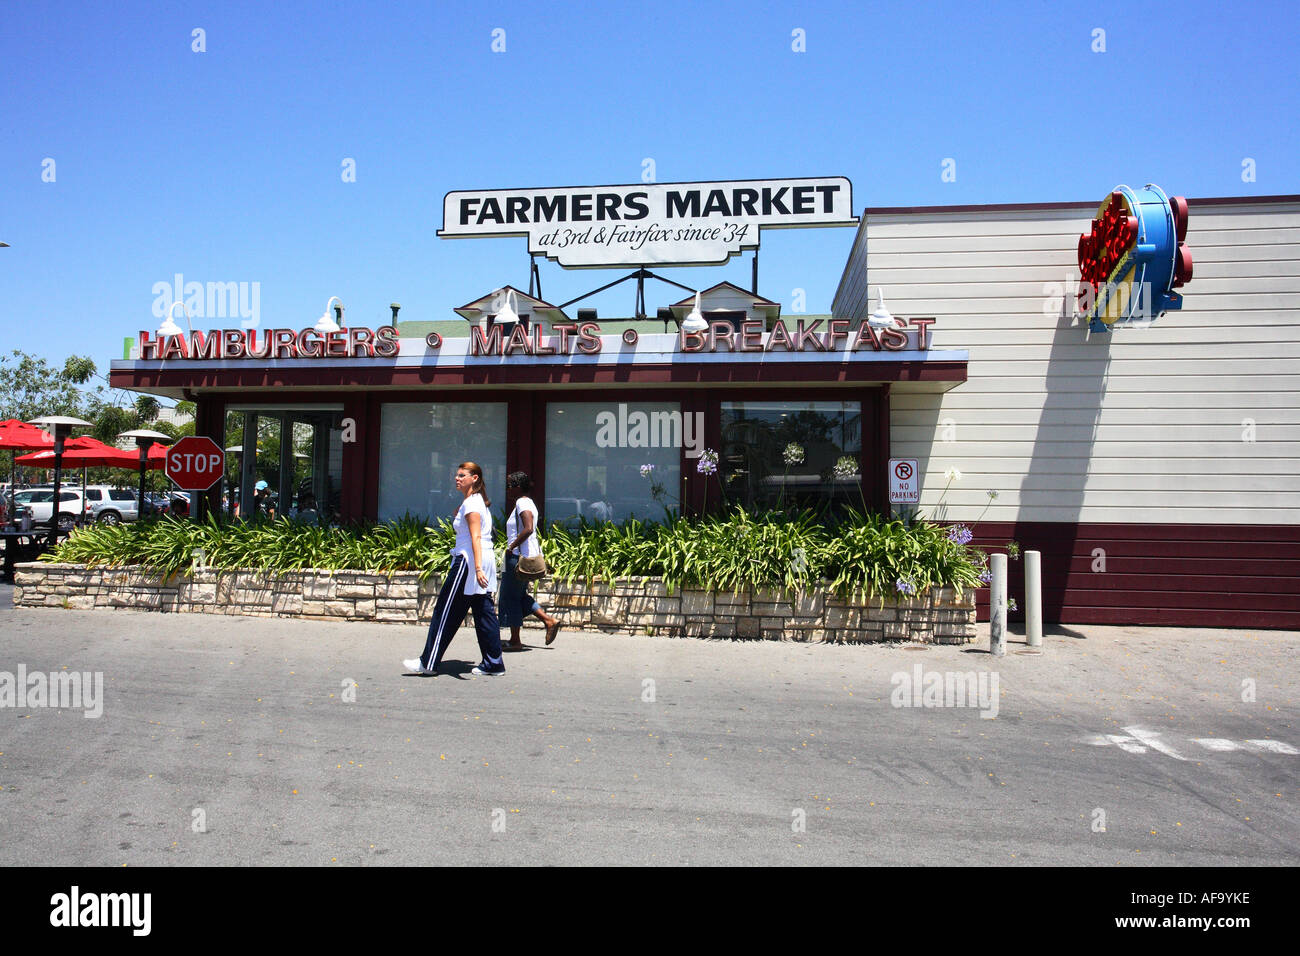 Farmers Market Los Angeles, United States of America. Stock Photo